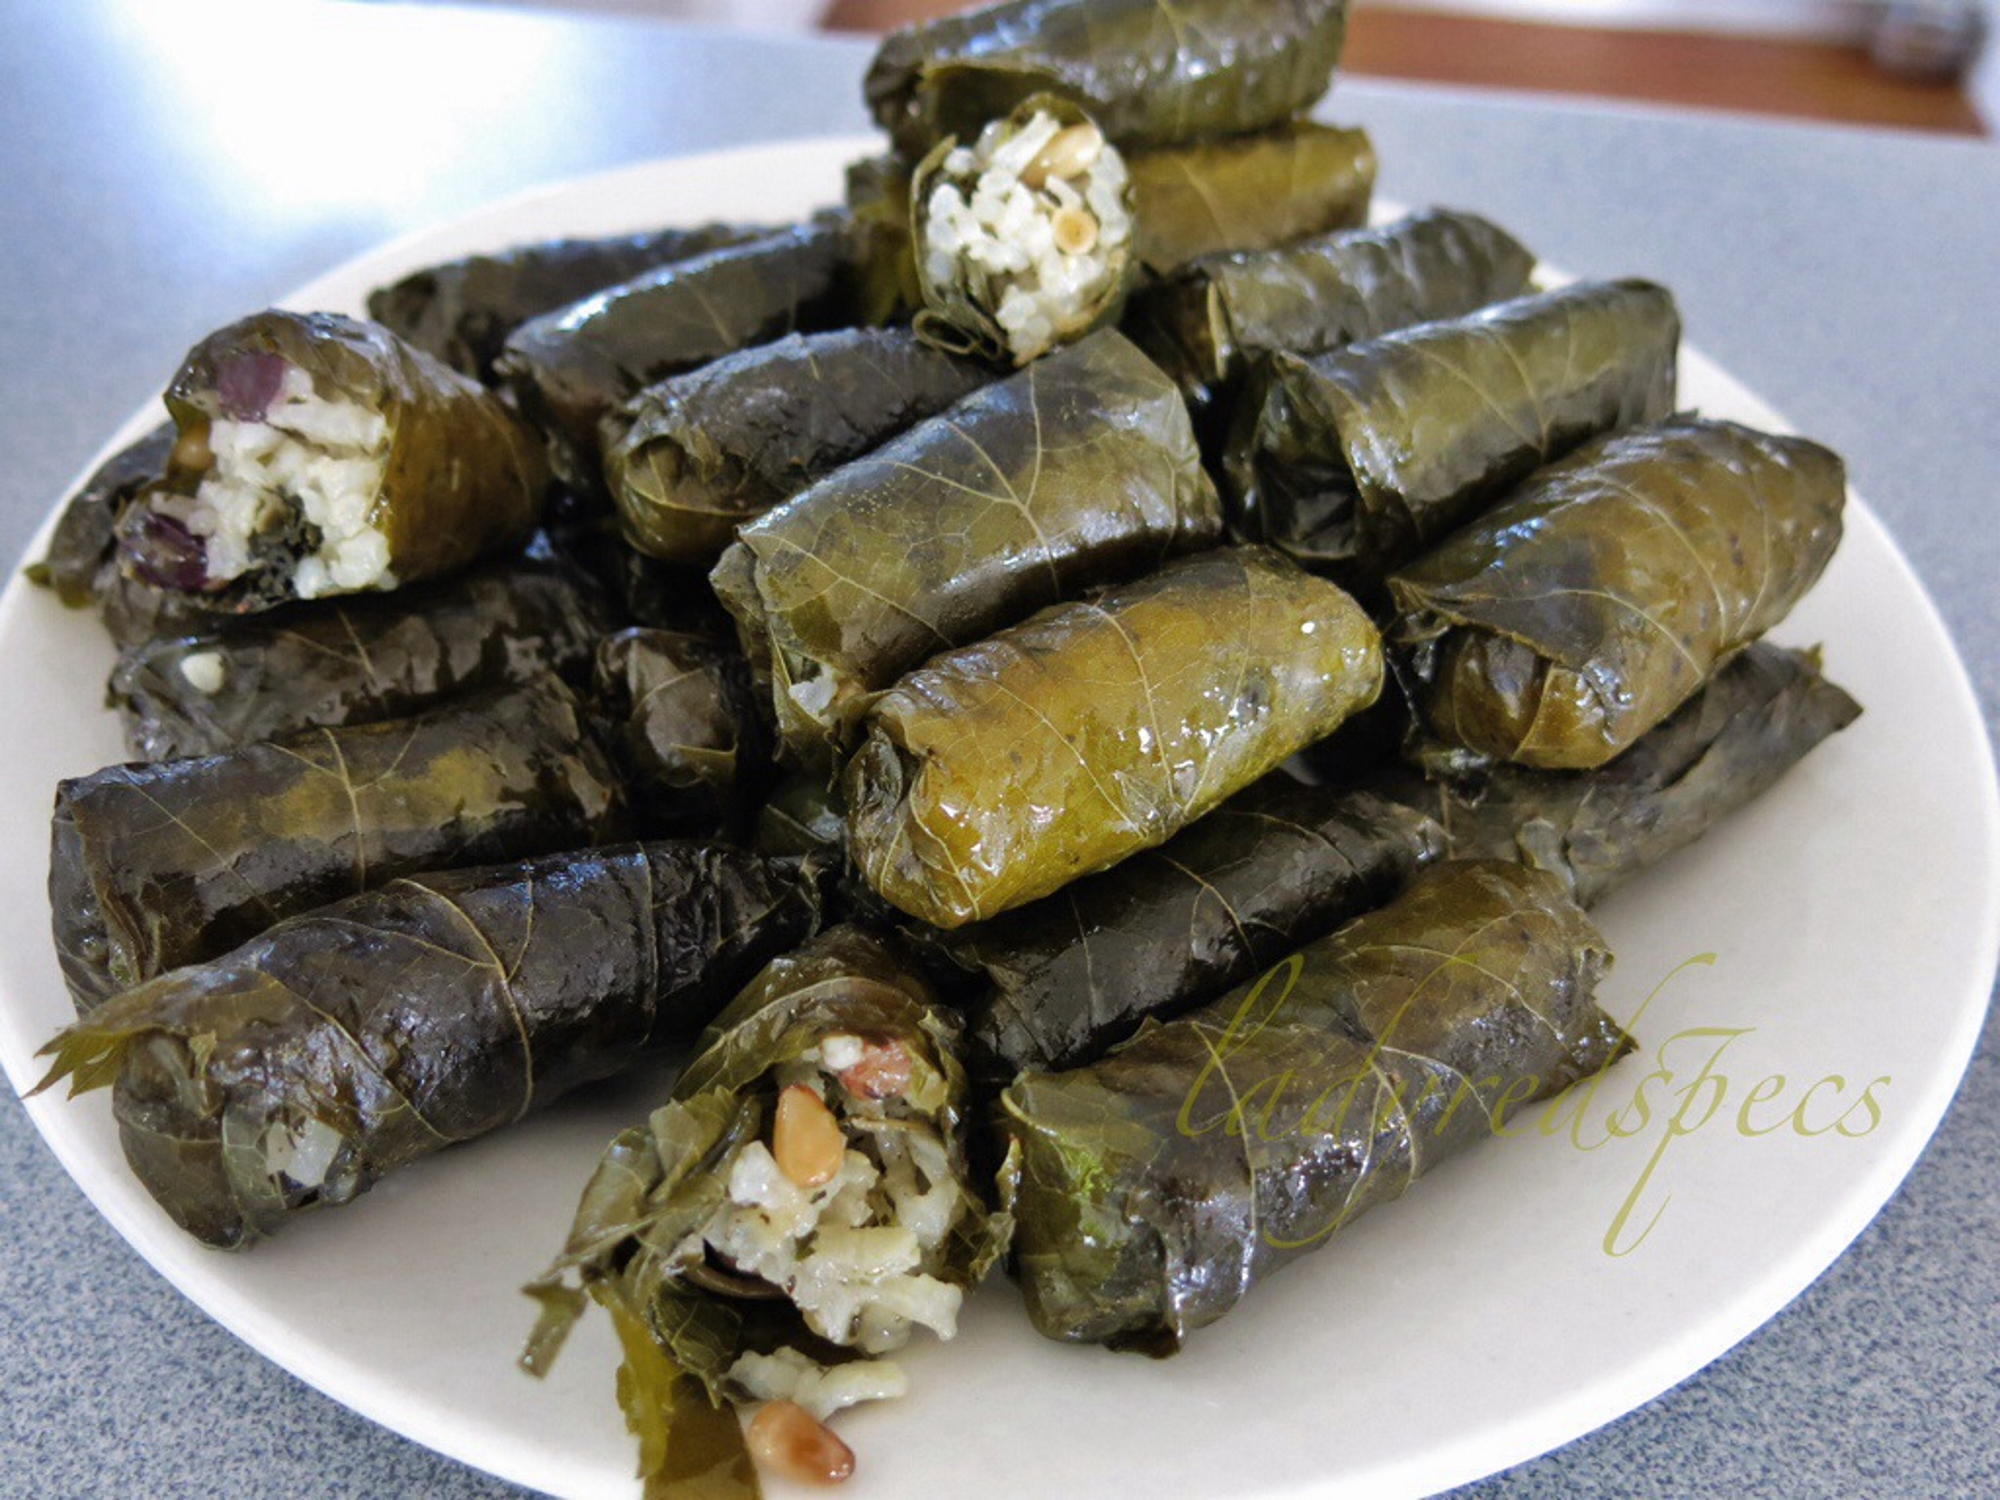 Greece Travel Secrets explains the long history of the Greek dish of dolmades, or stuffed vine leaves, which goes back to ancient Greece, and provides a recipe.